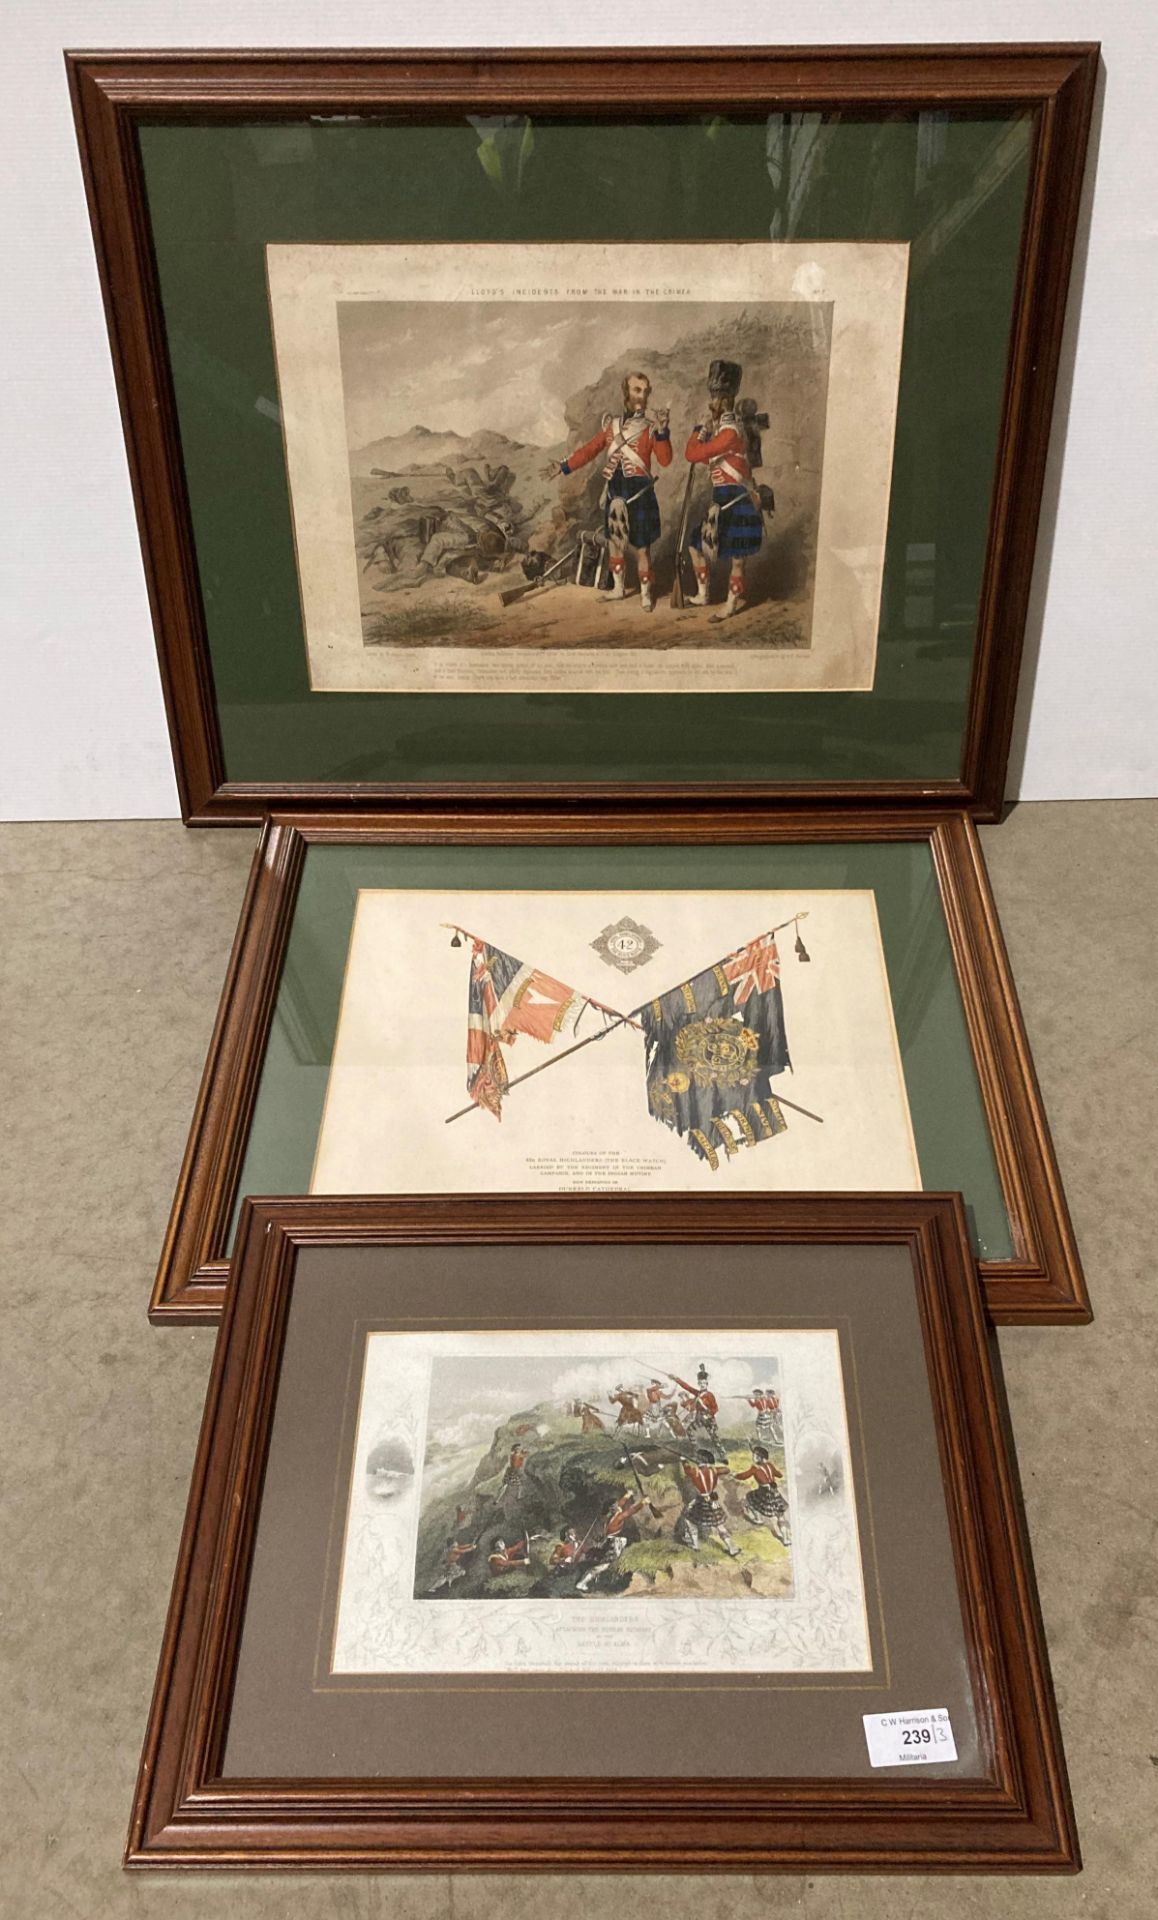 3 x framed original prints relating to the Black Watch 42nd Royal Highlanders in the Crimean War. 1.